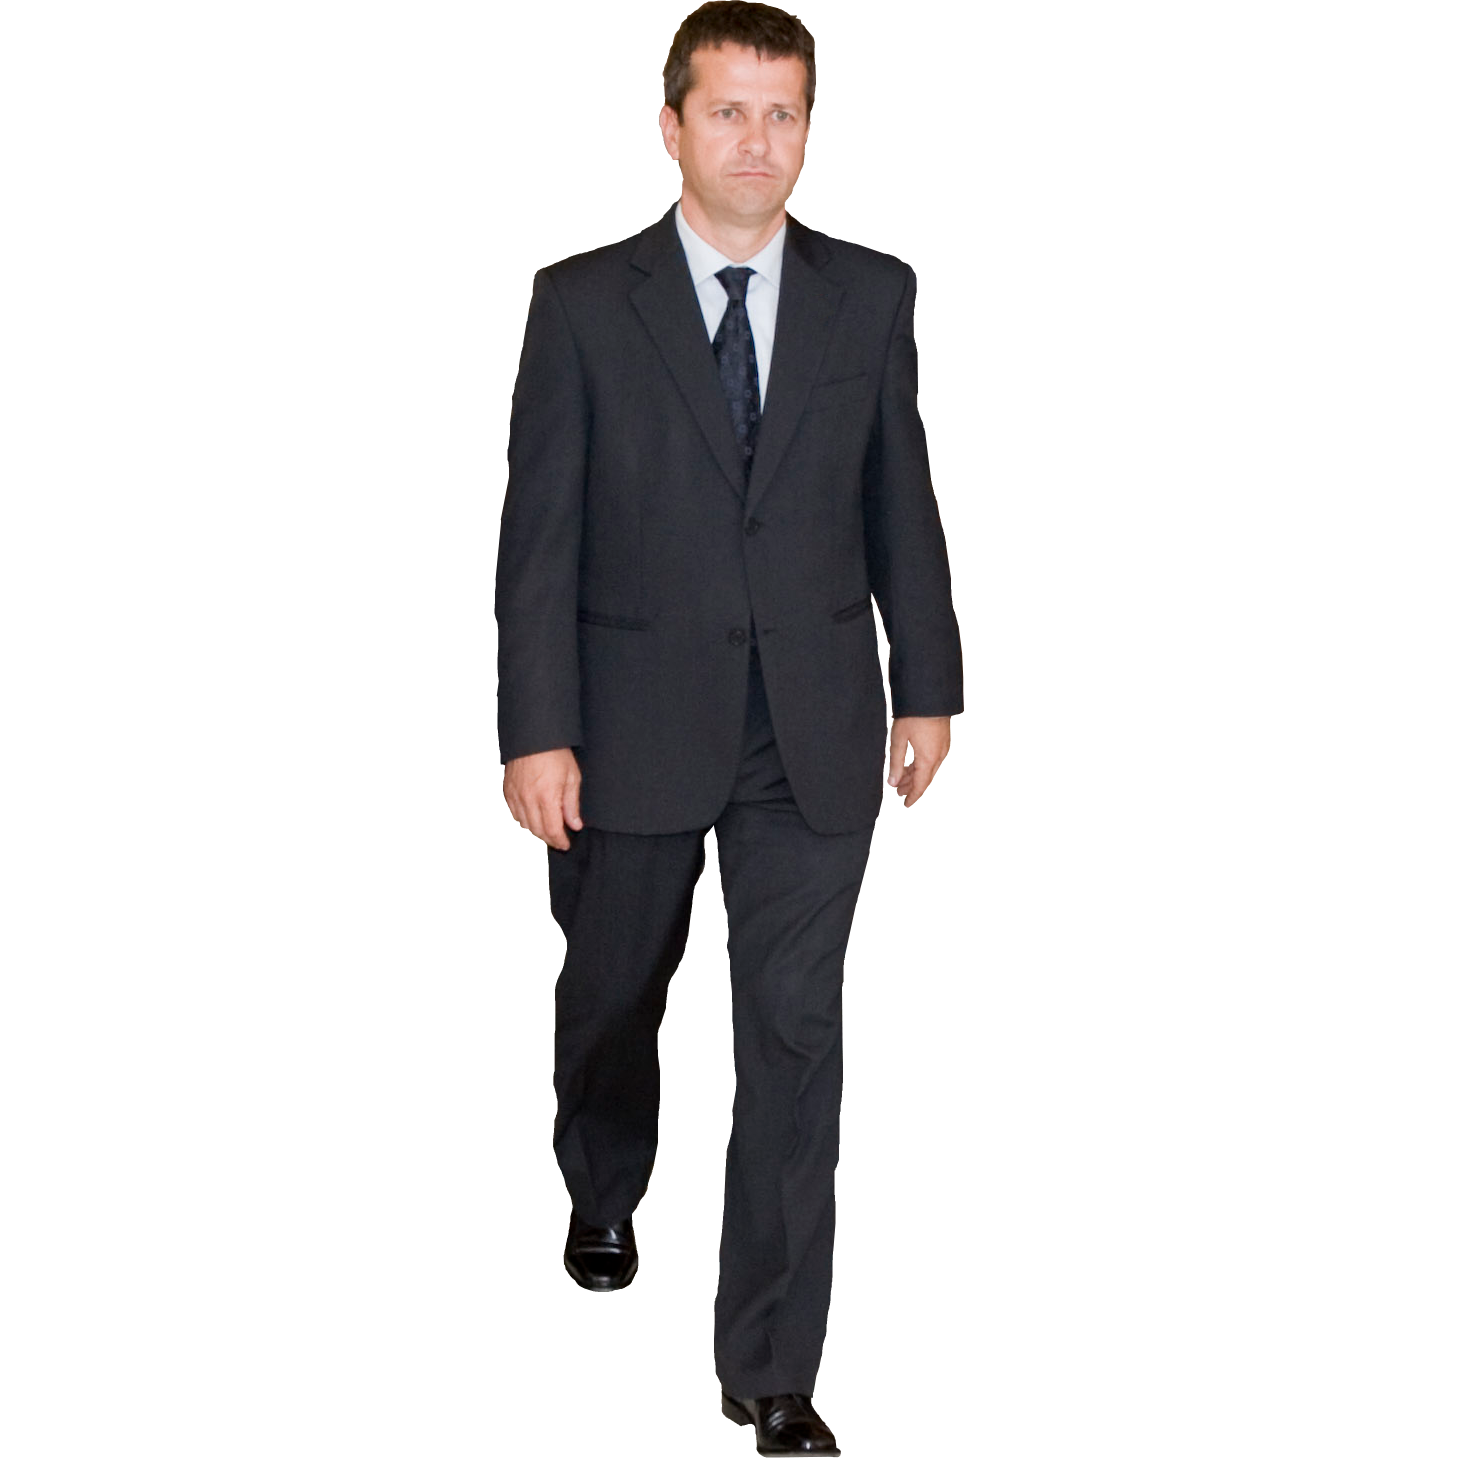 Person In A Suit PNG-PlusPNG.